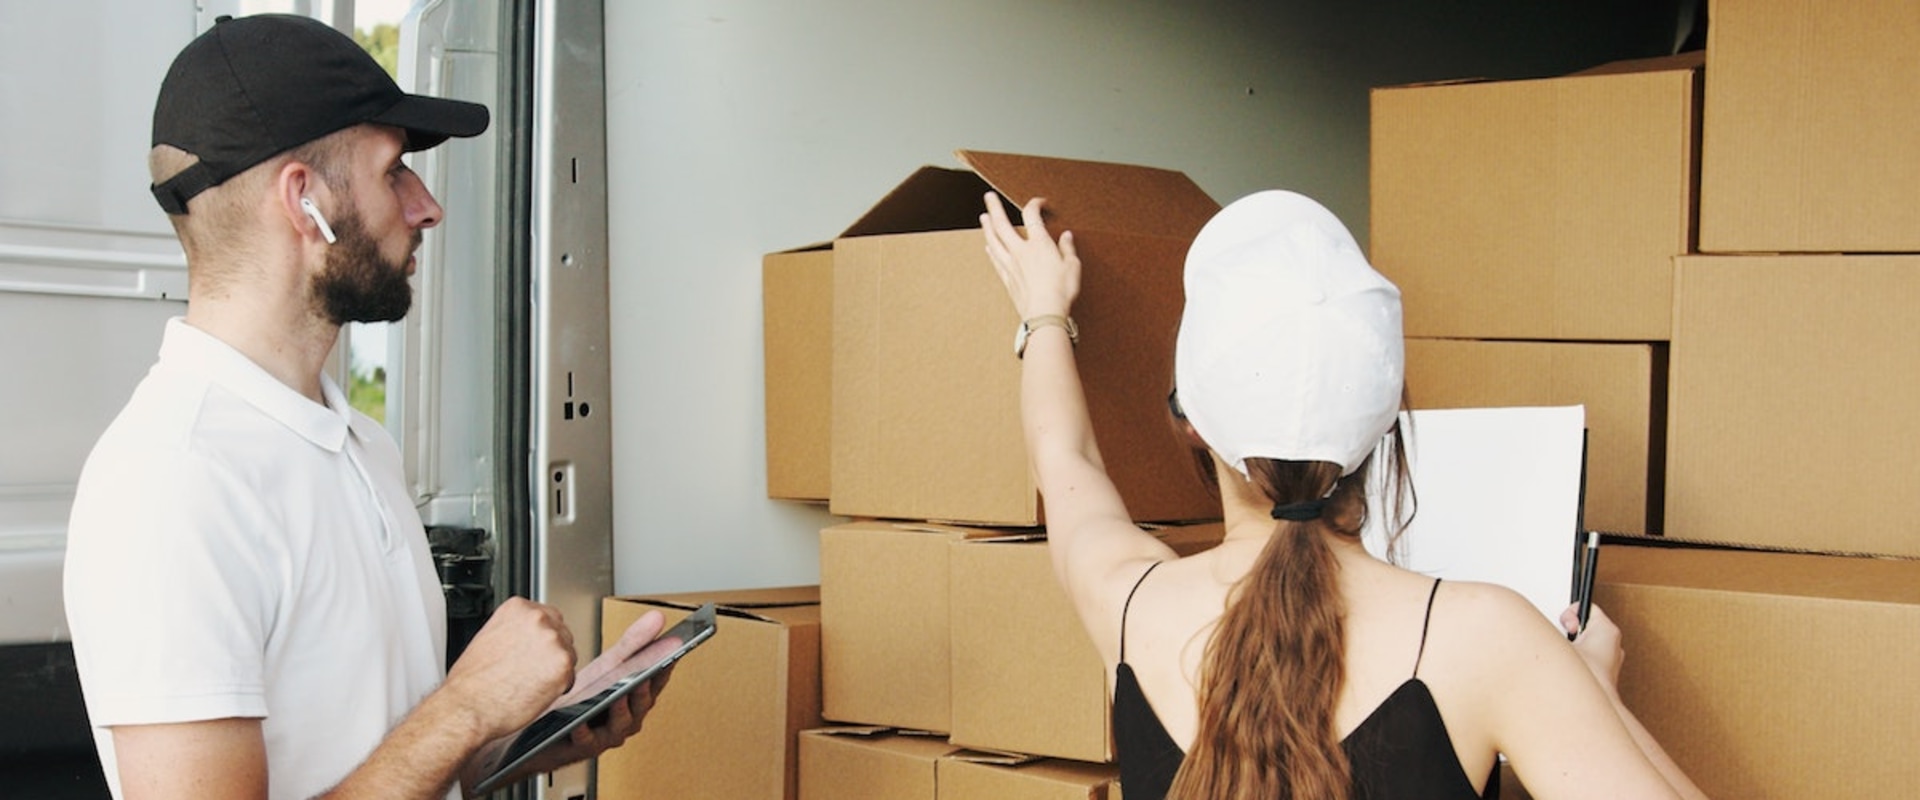 The Time-Saving Benefits of Hiring Professional Movers